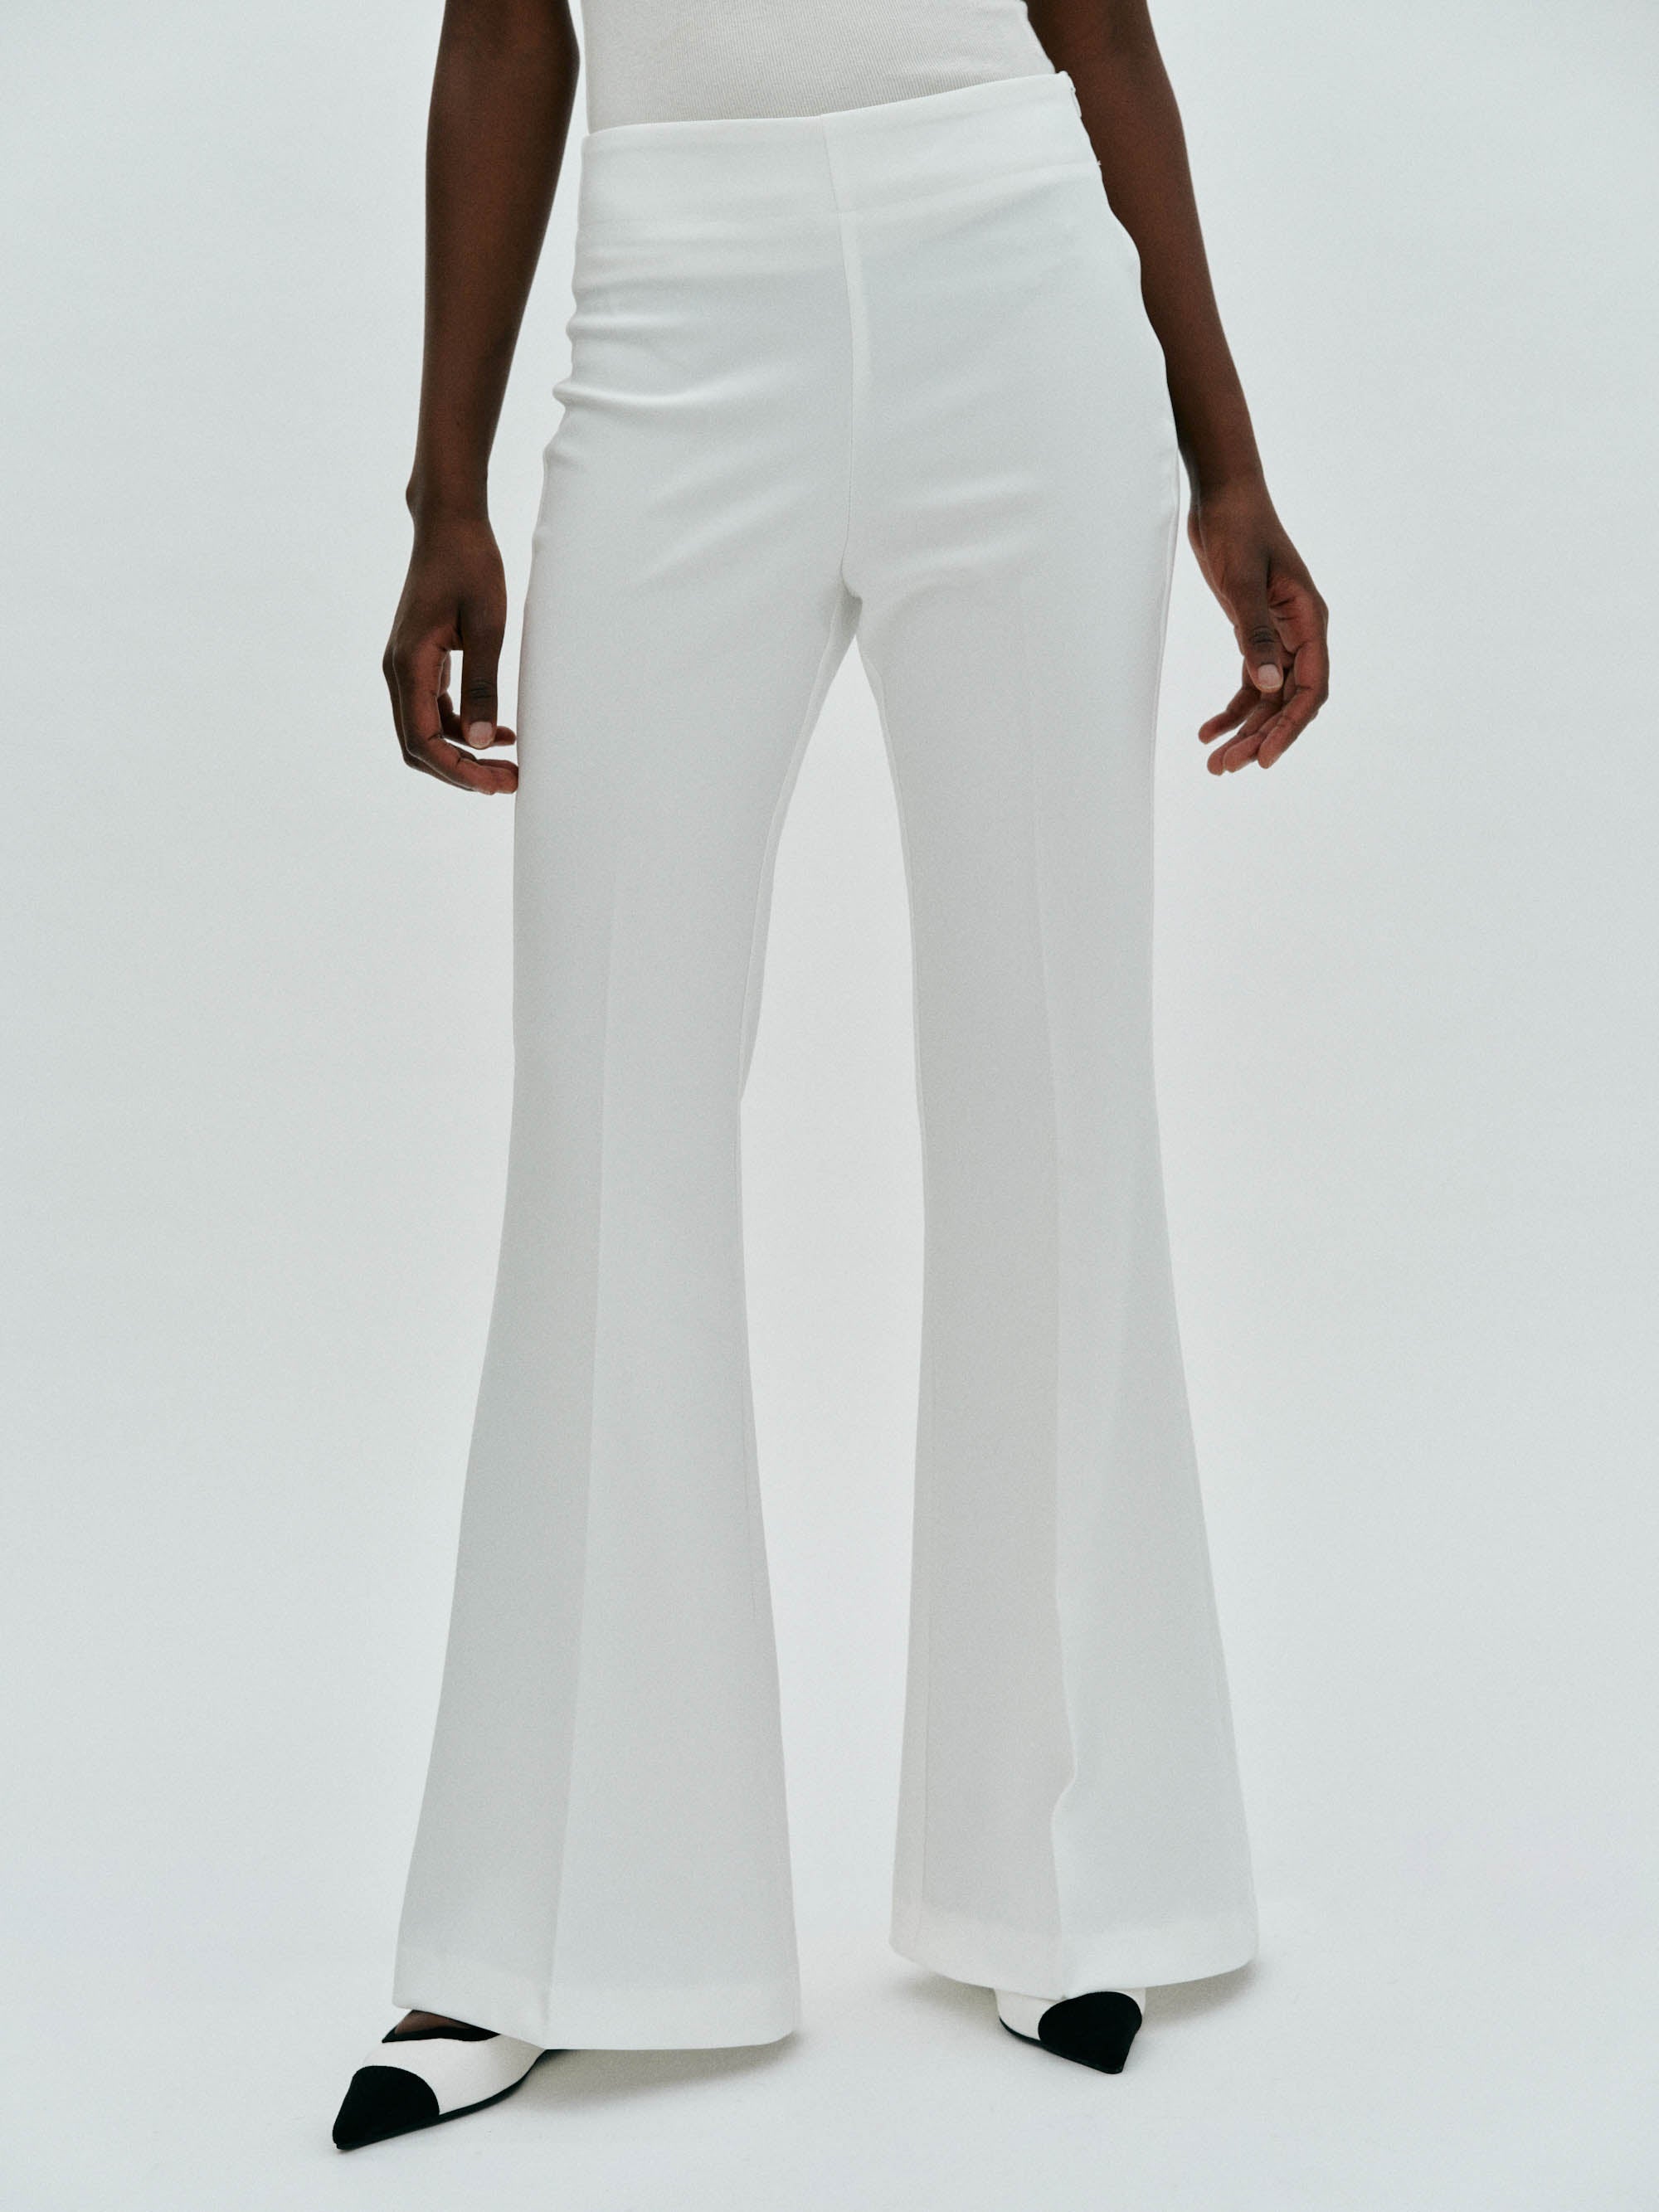 Flare Leg Solid Trousers | Pants for women, Clothes for women, Flares